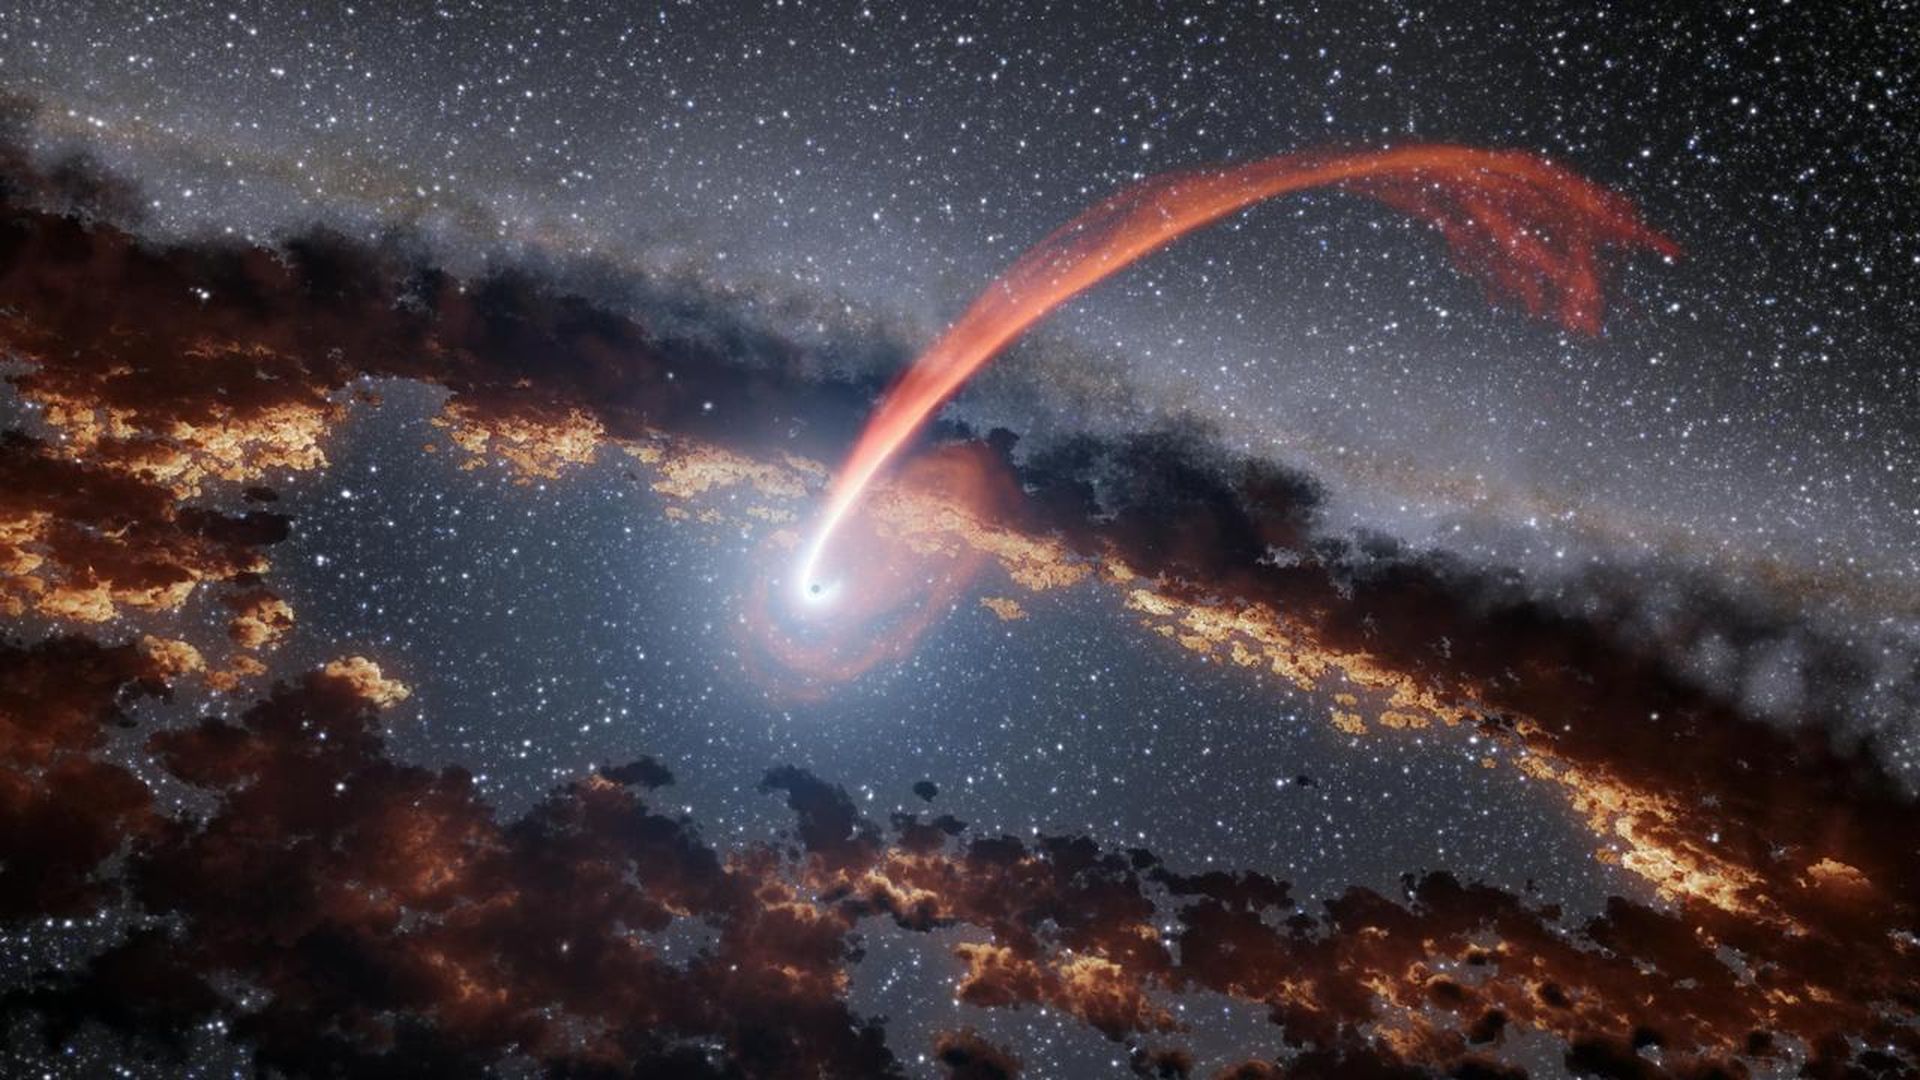 Artist's illustration of a black hole eating a star with black clouds around it.